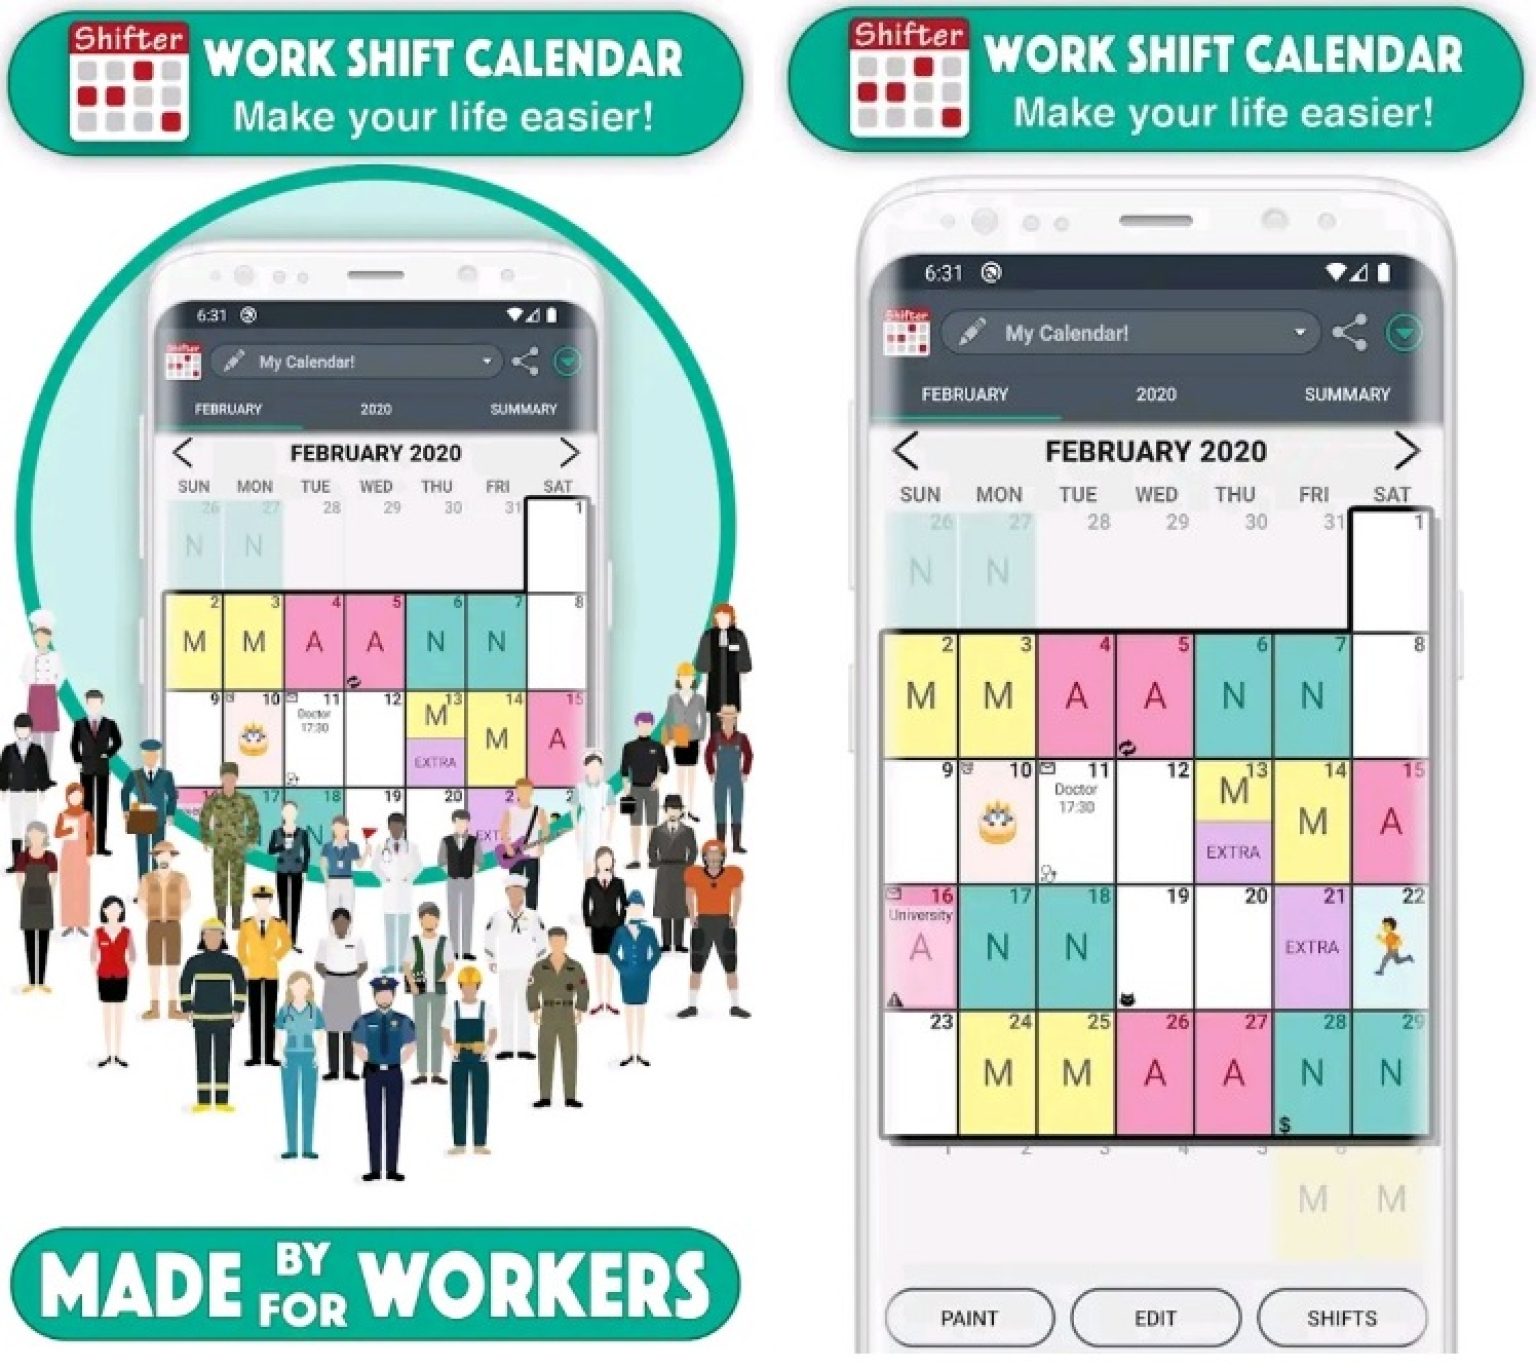 11 Free Shift Work Calendar Apps for Android & iOS Freeappsforme